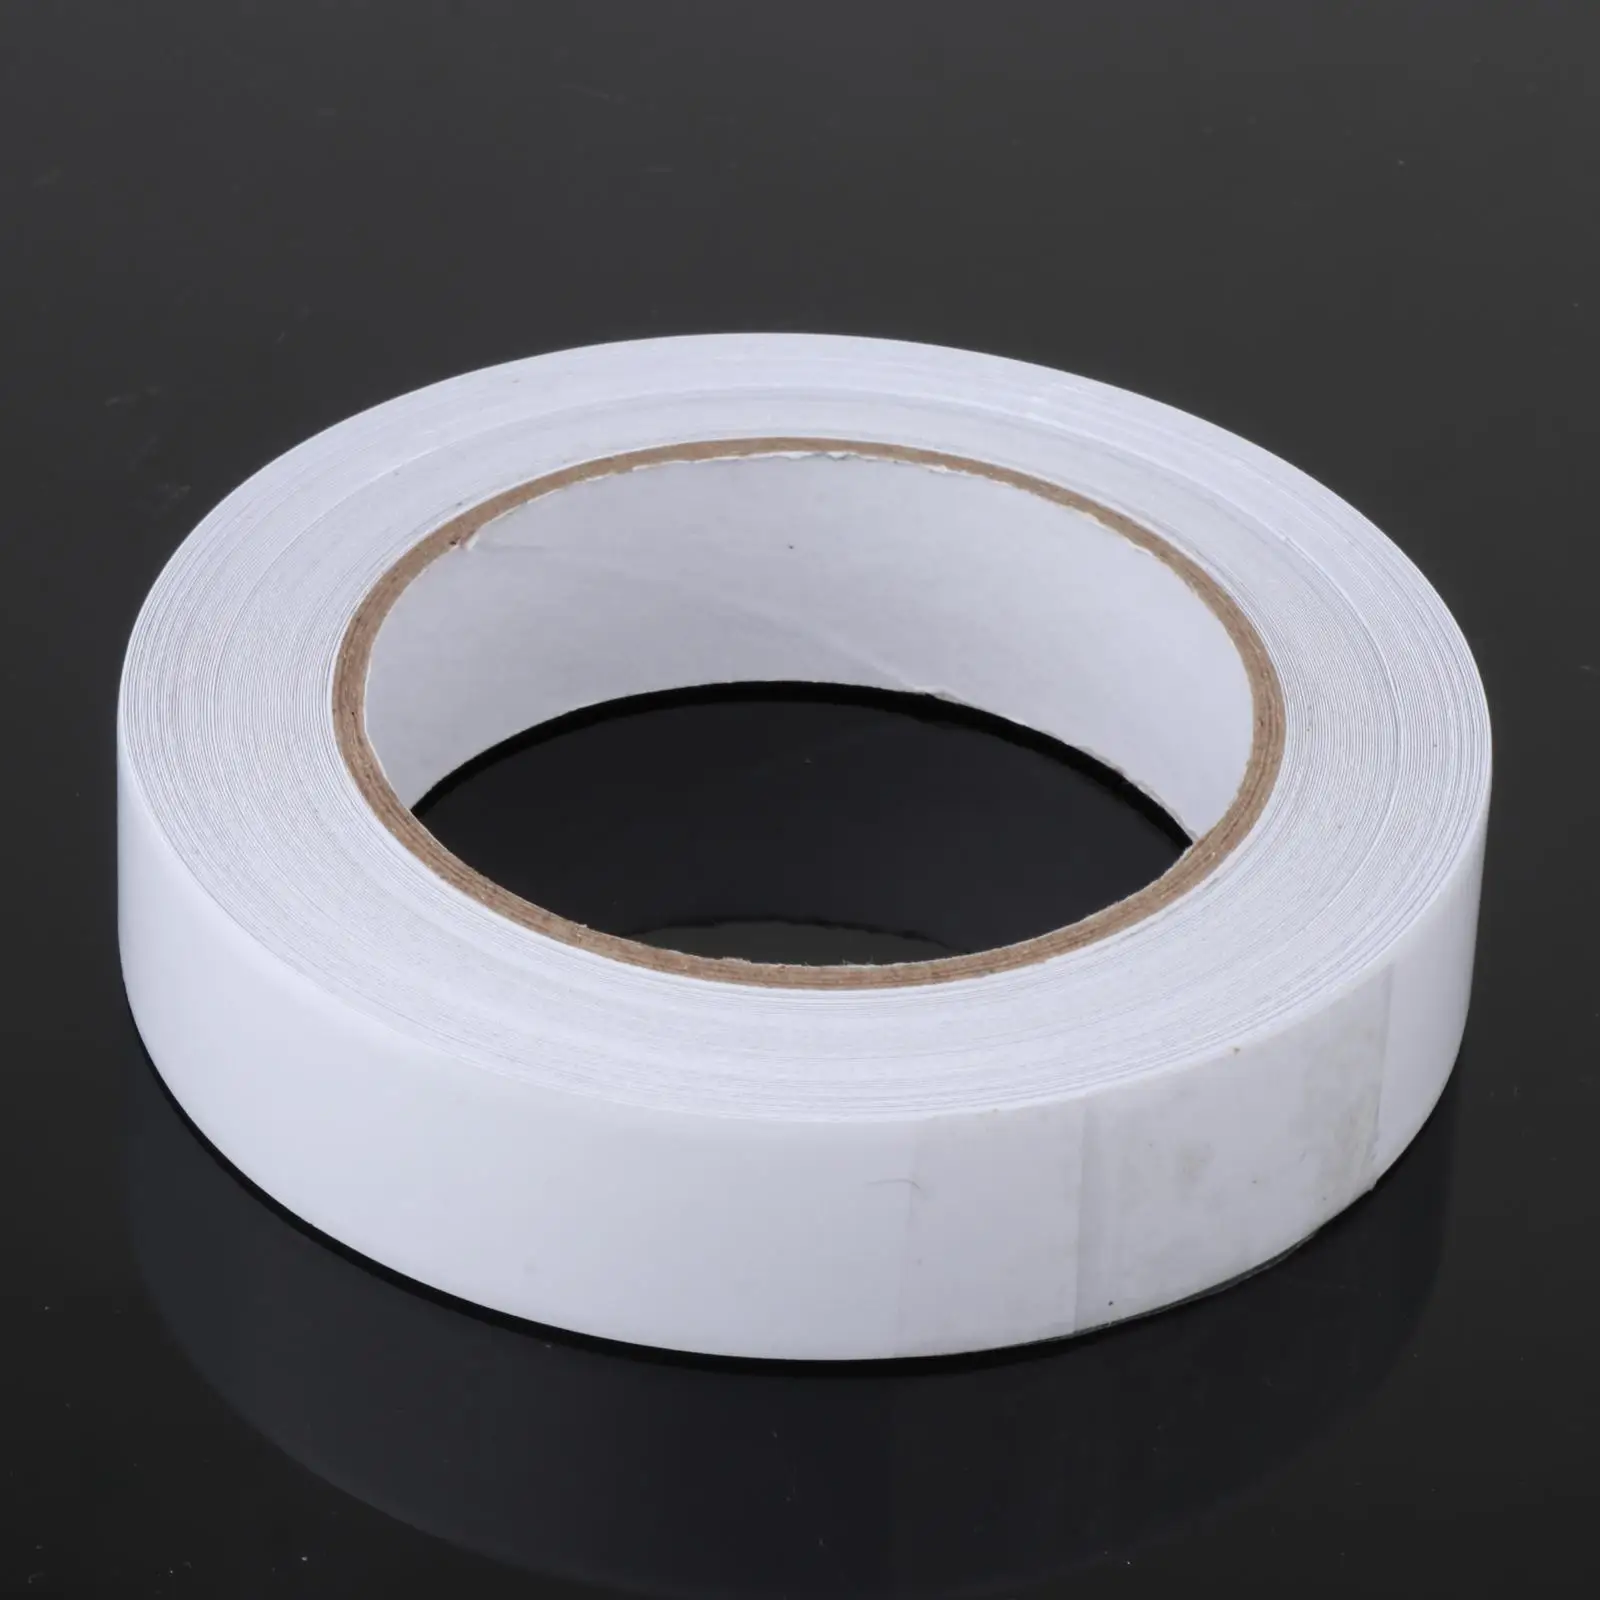 Swimming Rings Repair Tape Durable Awning Tent Self Adhesive Waterproof Cover Patch Pool Patch for Inflatable Toys Trampoline